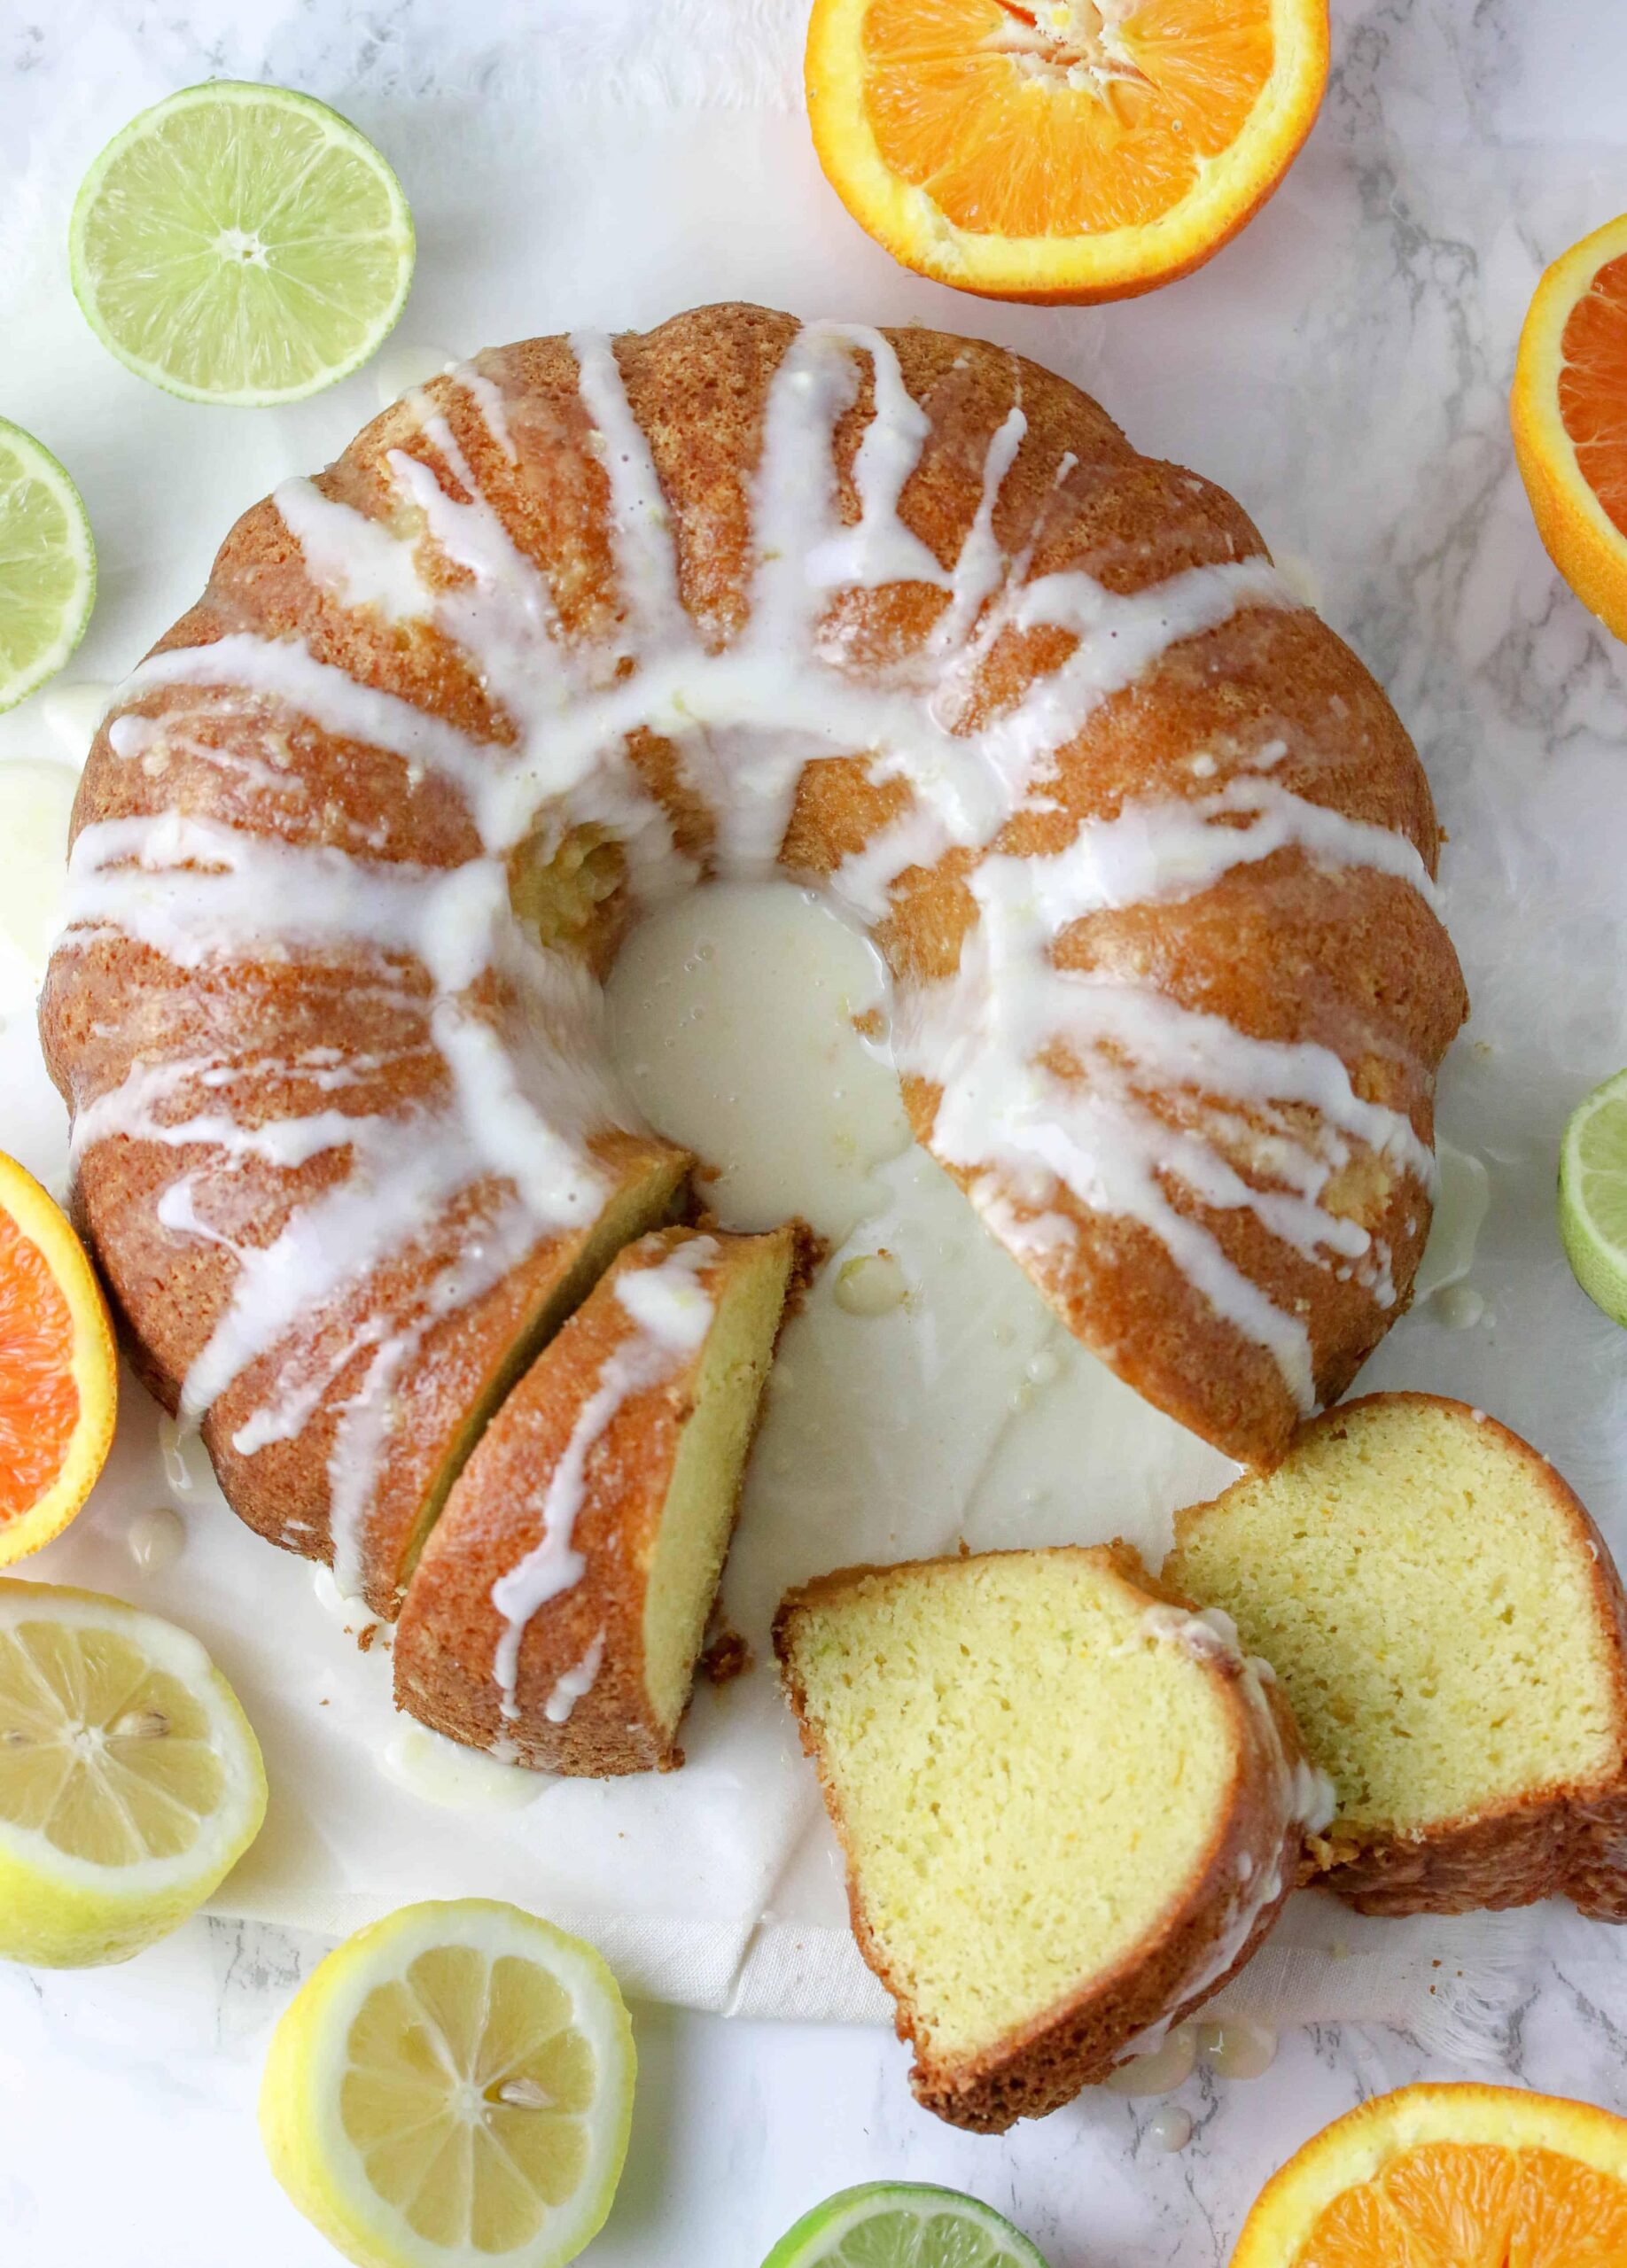  This Orange Sour Cream Pound Cake is the perfect dessert for any occasion and pairs beautifully with a hot cup of tea or coffee.